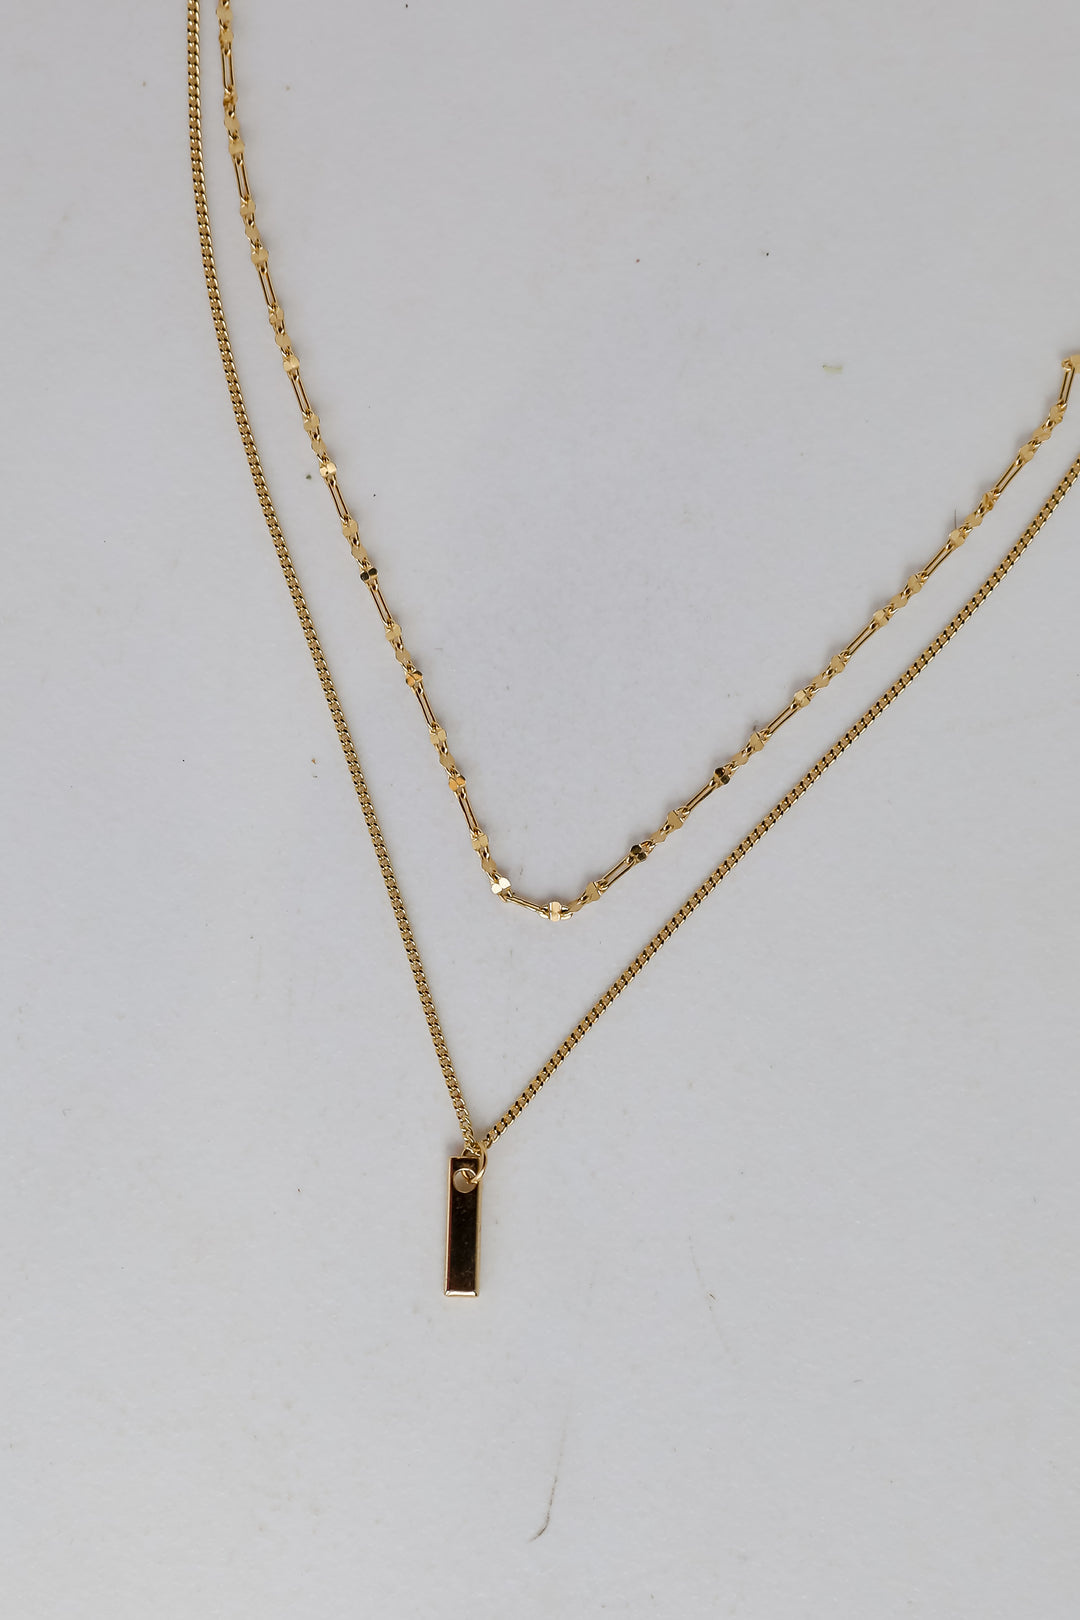 Charlie Gold Layered Chain Necklace dainty jewelry